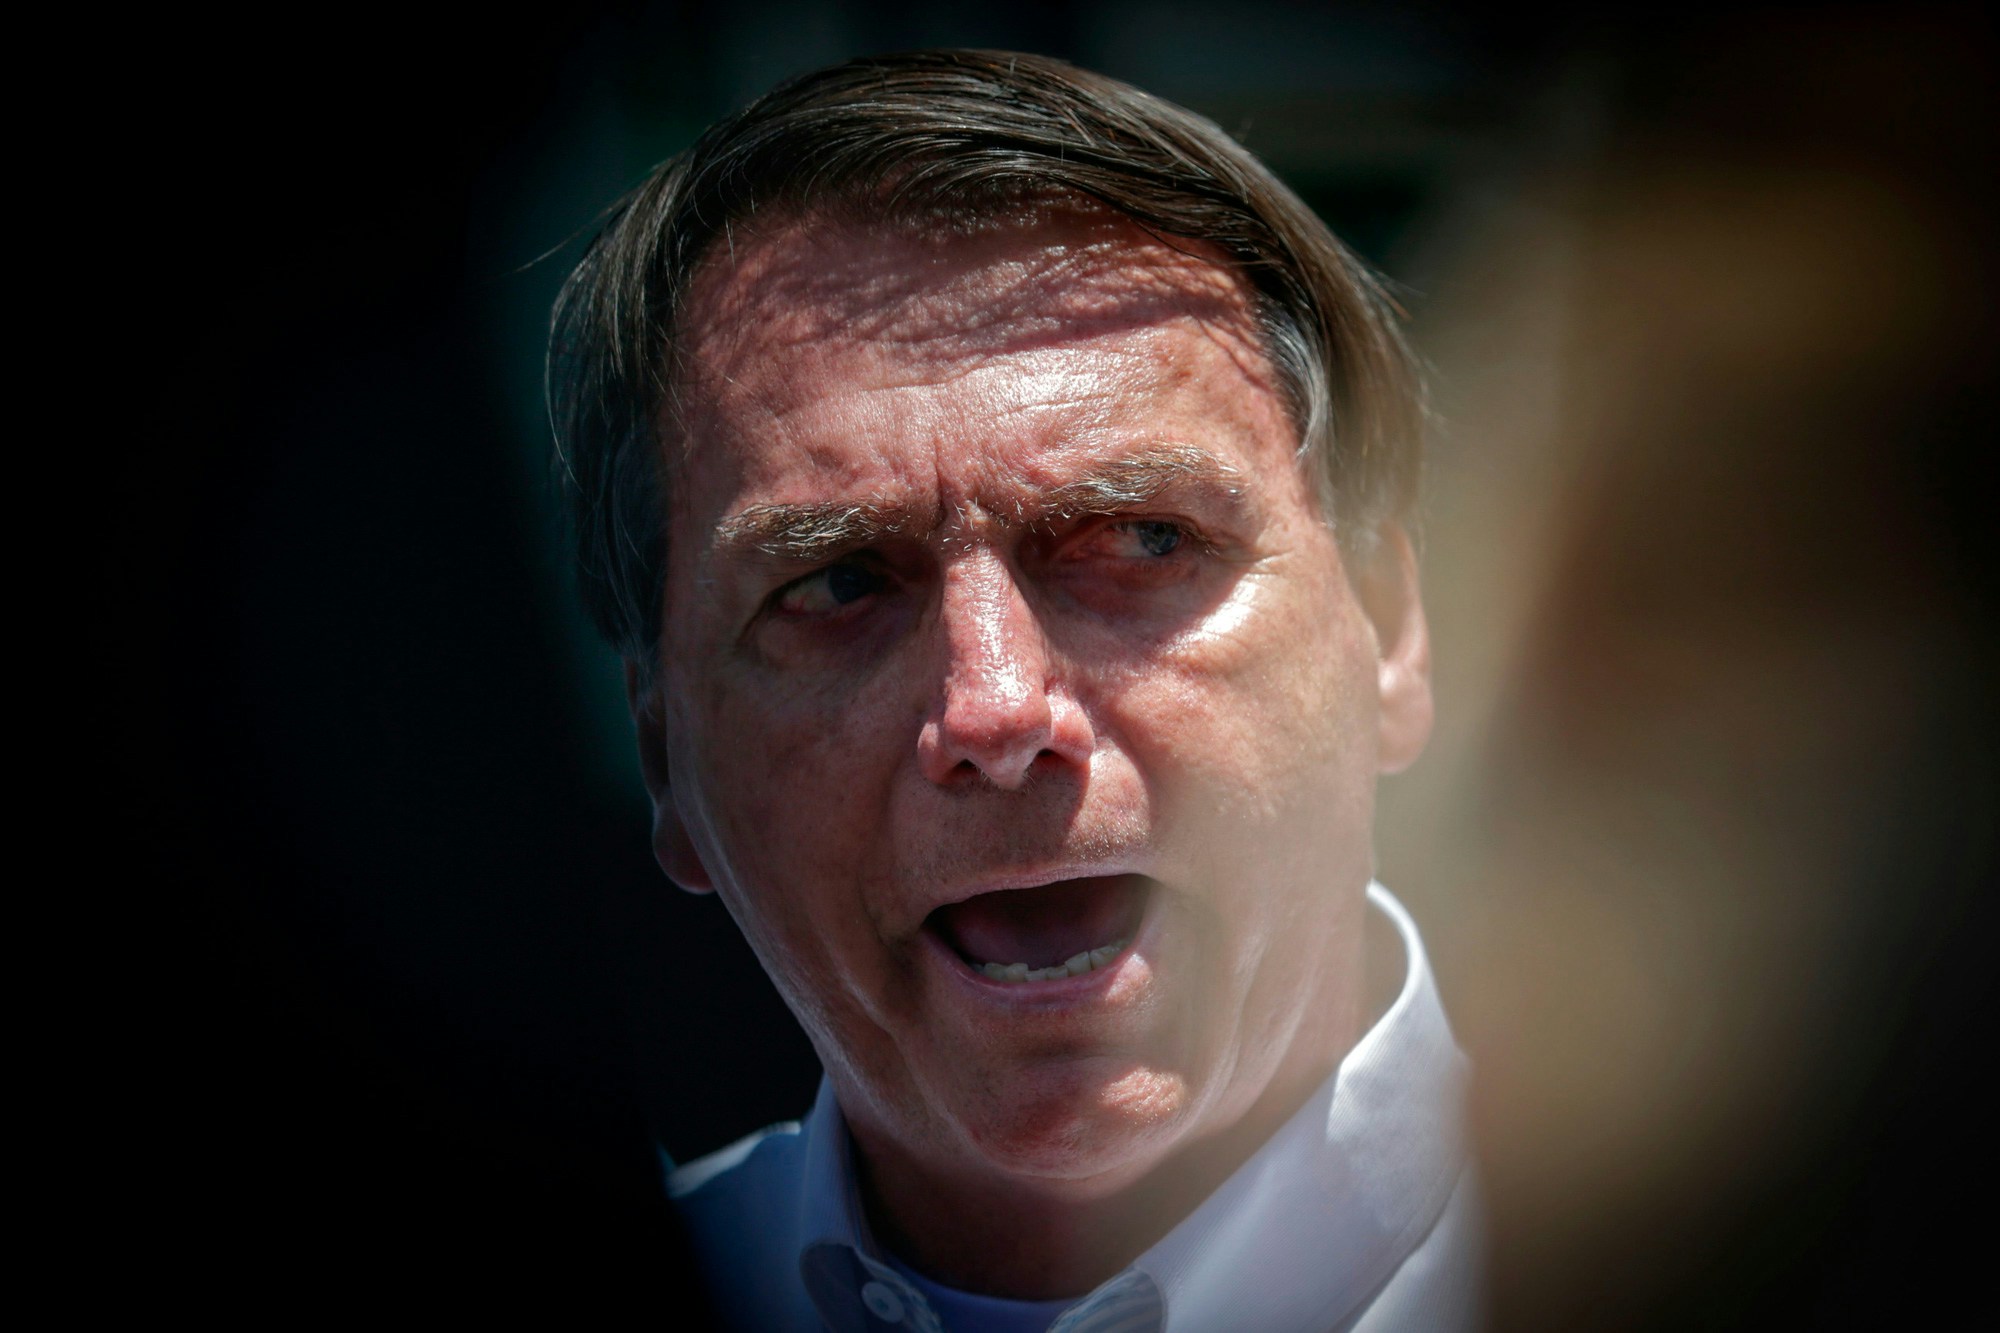 Brazilian President Jair Bolsonaro speaks to the press after voting during the second round of municipal elections at the Rosa da Fonseca Municipal School, in the Military Village, Rio de Janeiro, Brazil, on November 29, 2020. - Brazilians go to the polls Sunday to chose mayors in 57 cities, including Sao Paulo and Rio de Janeiro, the most rich and populated, in a runoff marked by the economic crisis and an upsurge of the new coronavirus. (Photo by Andre Coelho / AFP) (Photo by ANDRE COELHO/AFP via Getty Images)